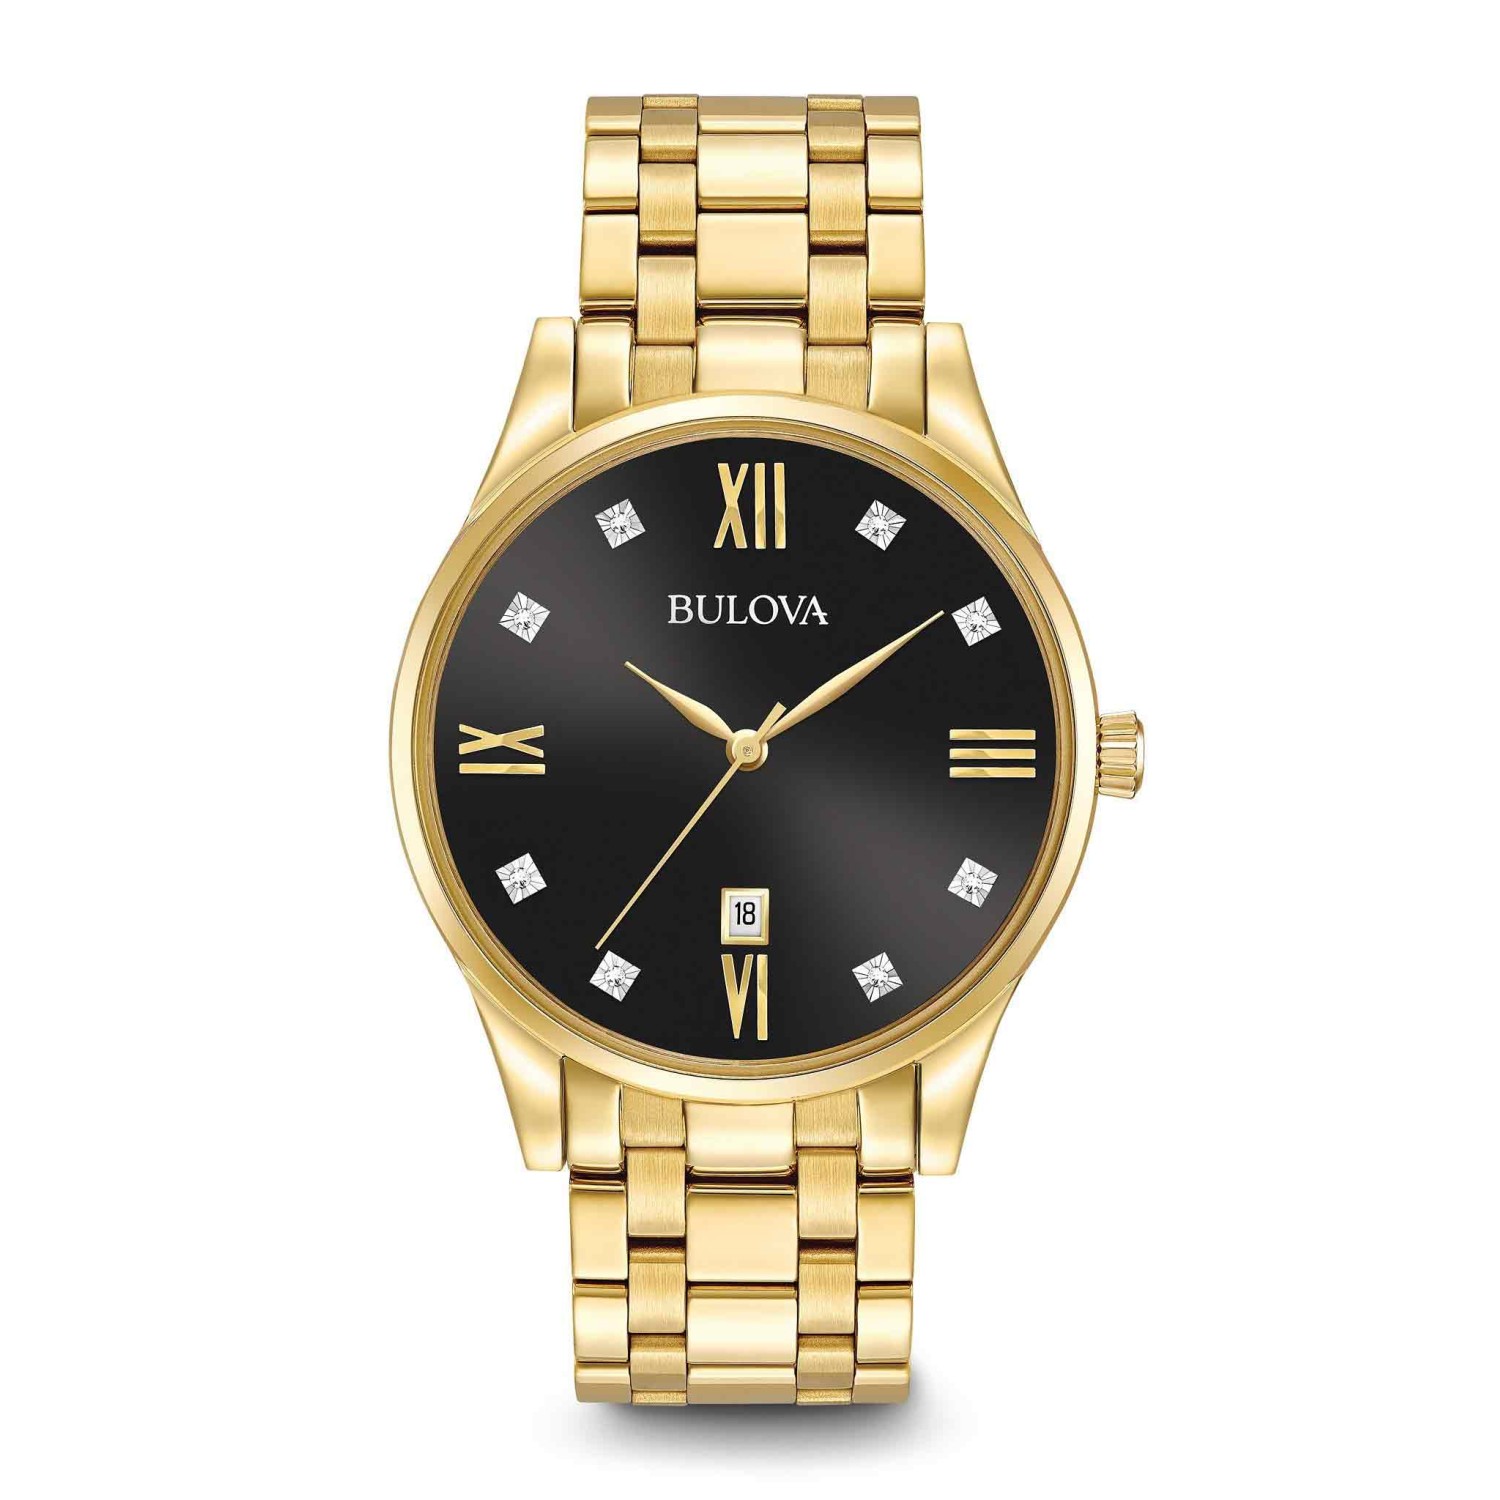 97D108 Bulova Mens Diamond Watch. From the Diamonds Collection. New 8-diamond black dial, gold-tone stainless steel case and bracelet with double-press deployant closure, three-hand calendar, and flat mineral glass.3 Year Guarantee  Oxipay is simply @chri